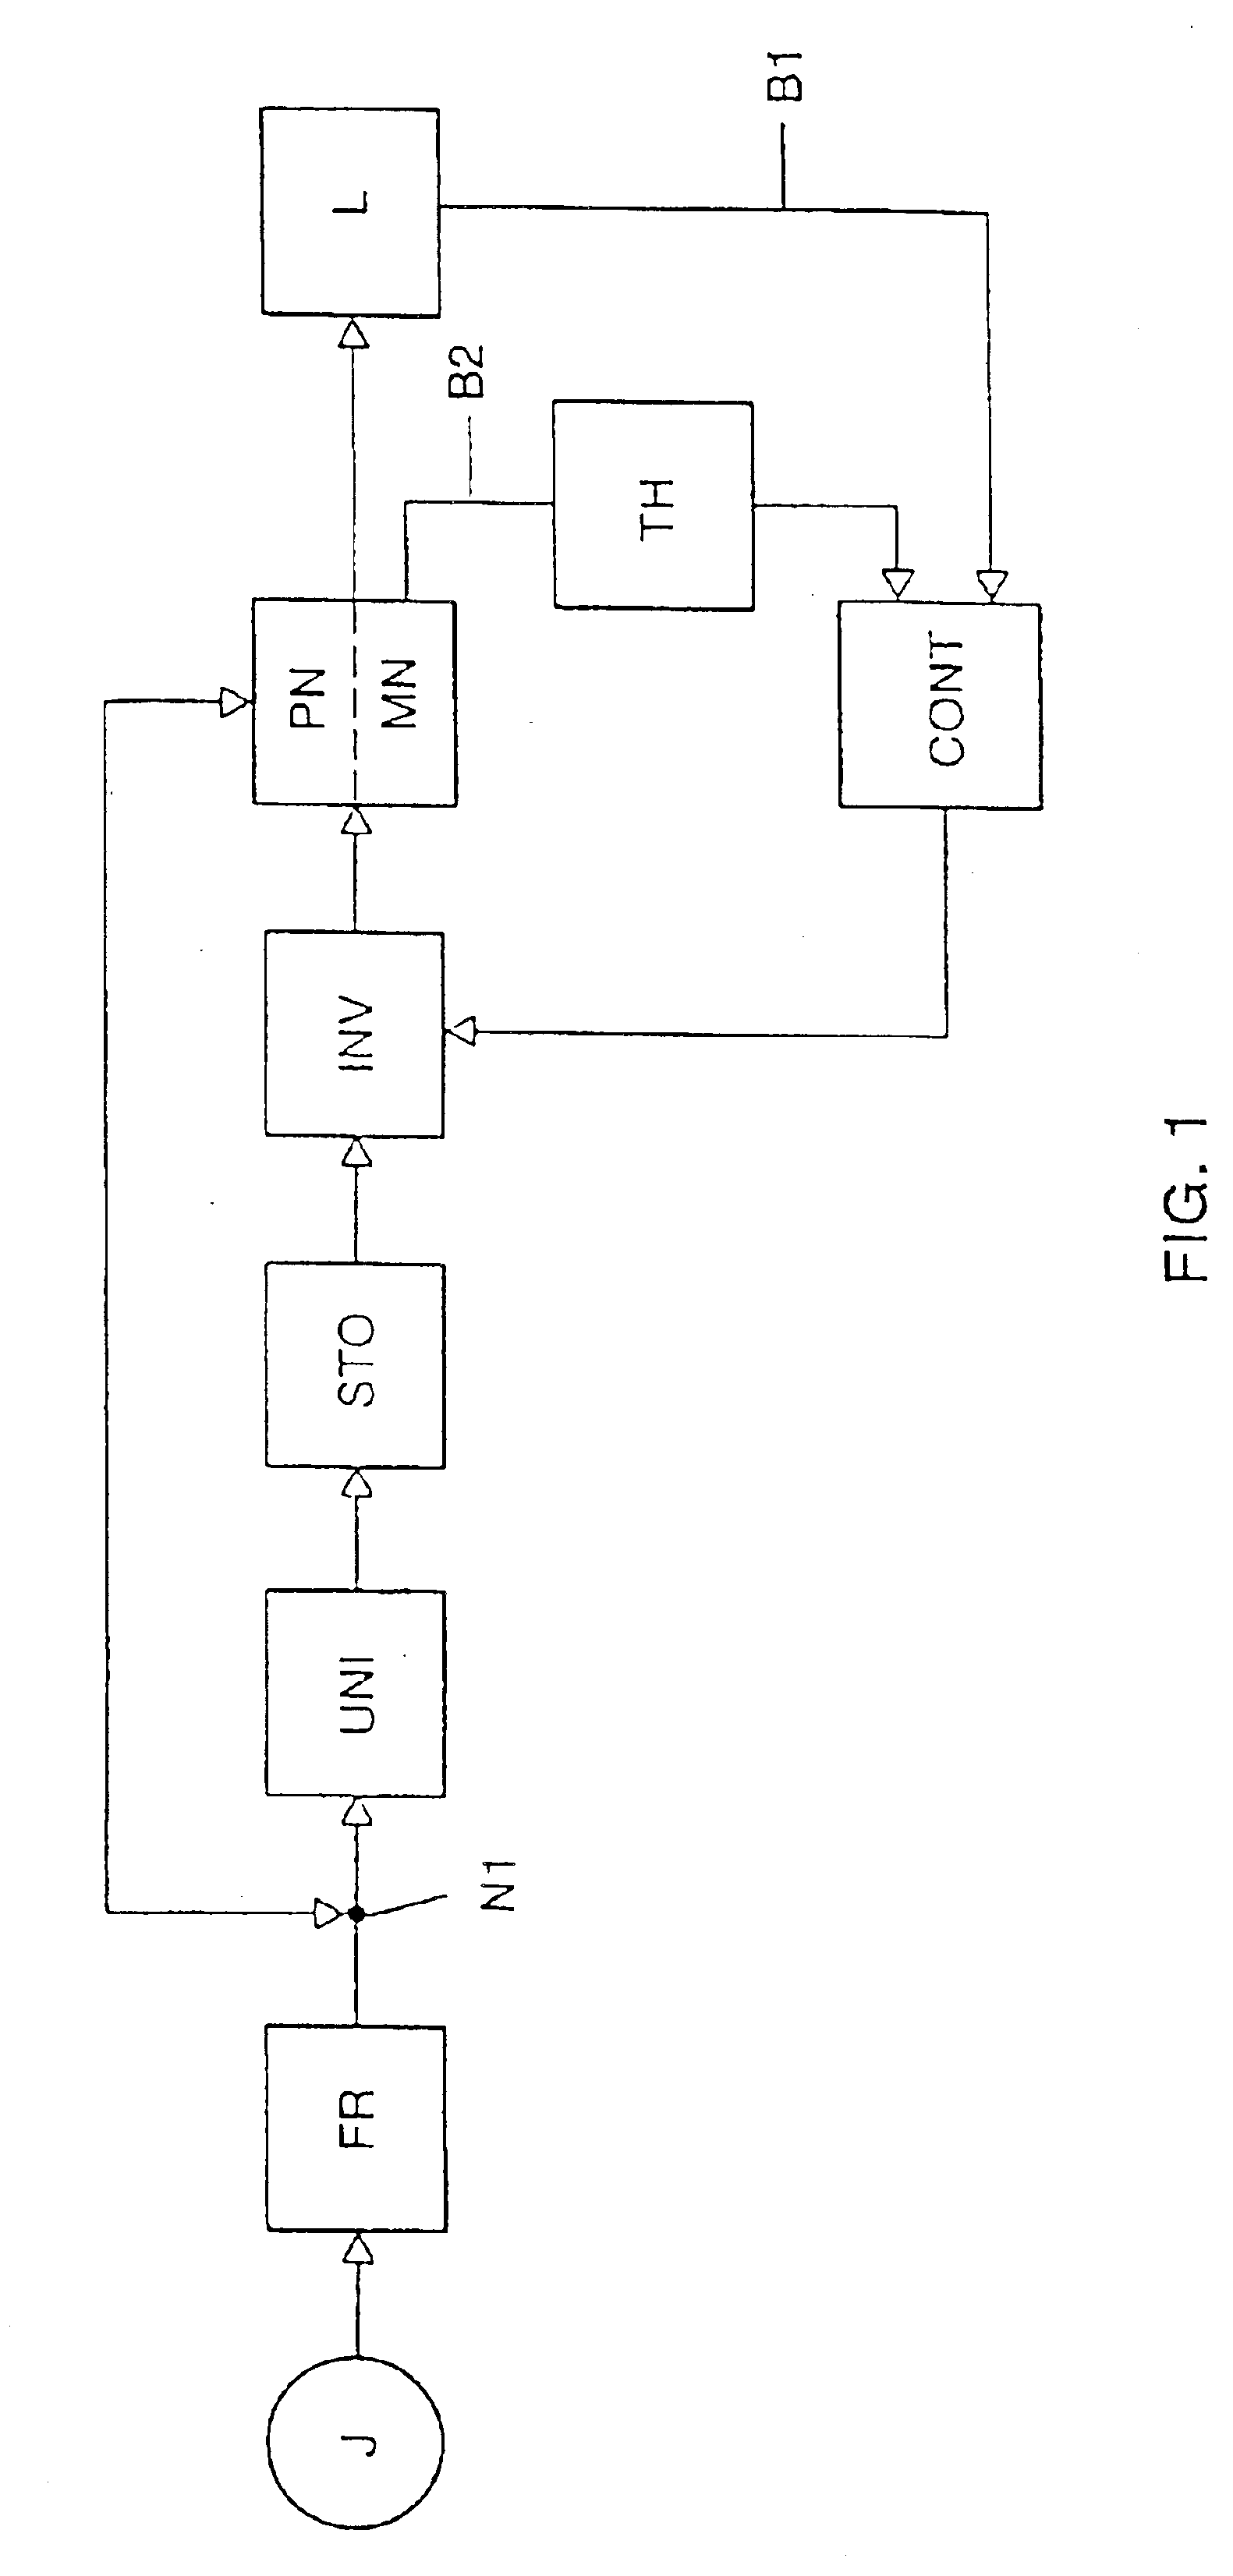 Circuit arrangement and method for starting and operating discharge lamps